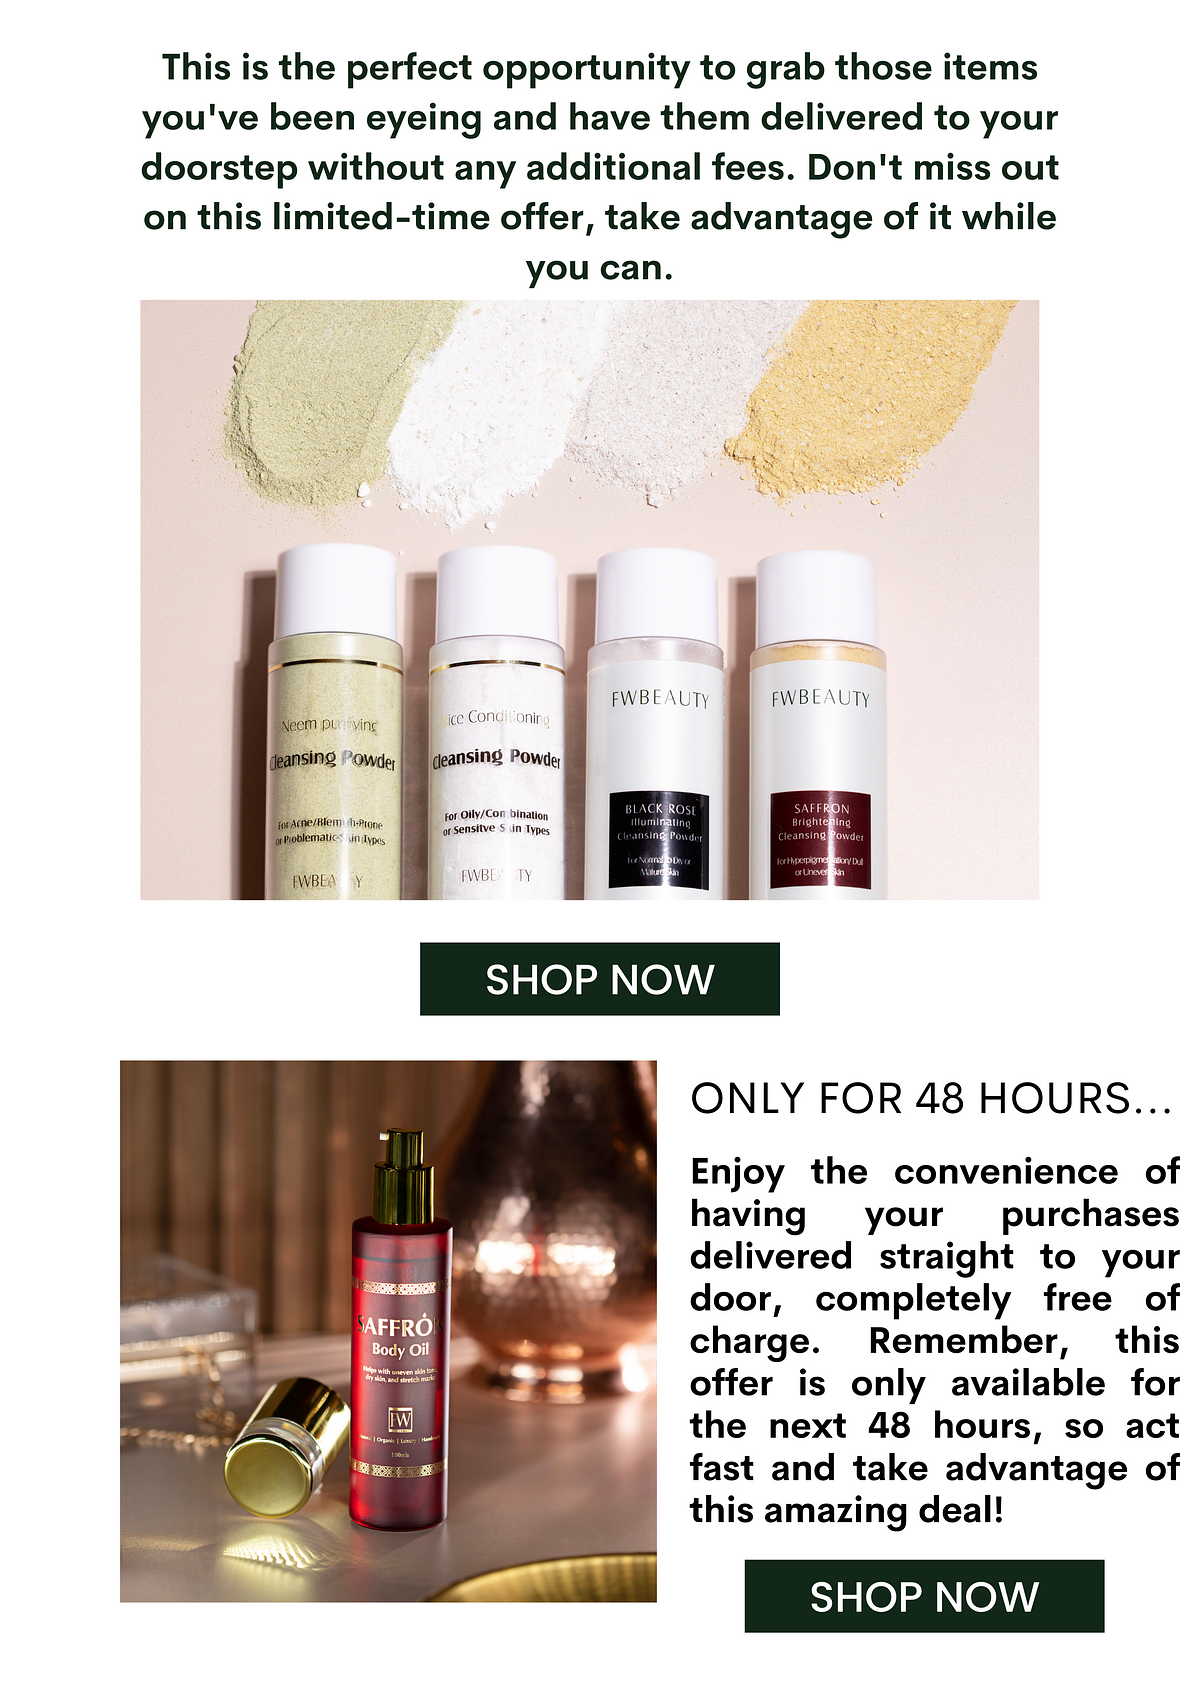 This is the perfect opportunity to grab those items you've been eyeing and have them delivered to your doorstep without any additional fees. Don't miss out on this limited-time offer, take advantage of it while you can. FWBEAUTY FWBEAUTY ice Condonir nsing Powd for OllyCon bination 3 arsensitve i Types 8 FWBL Y ONLY FOR 48 HOURS... Enjoy the convenience of having your purchases delivered straight to your door, completely free of :Asiff%? . charge. Remember, this offer is only available for the next 48 hours, so act fast and take advantage of this amazing deal! SHOP NOW 